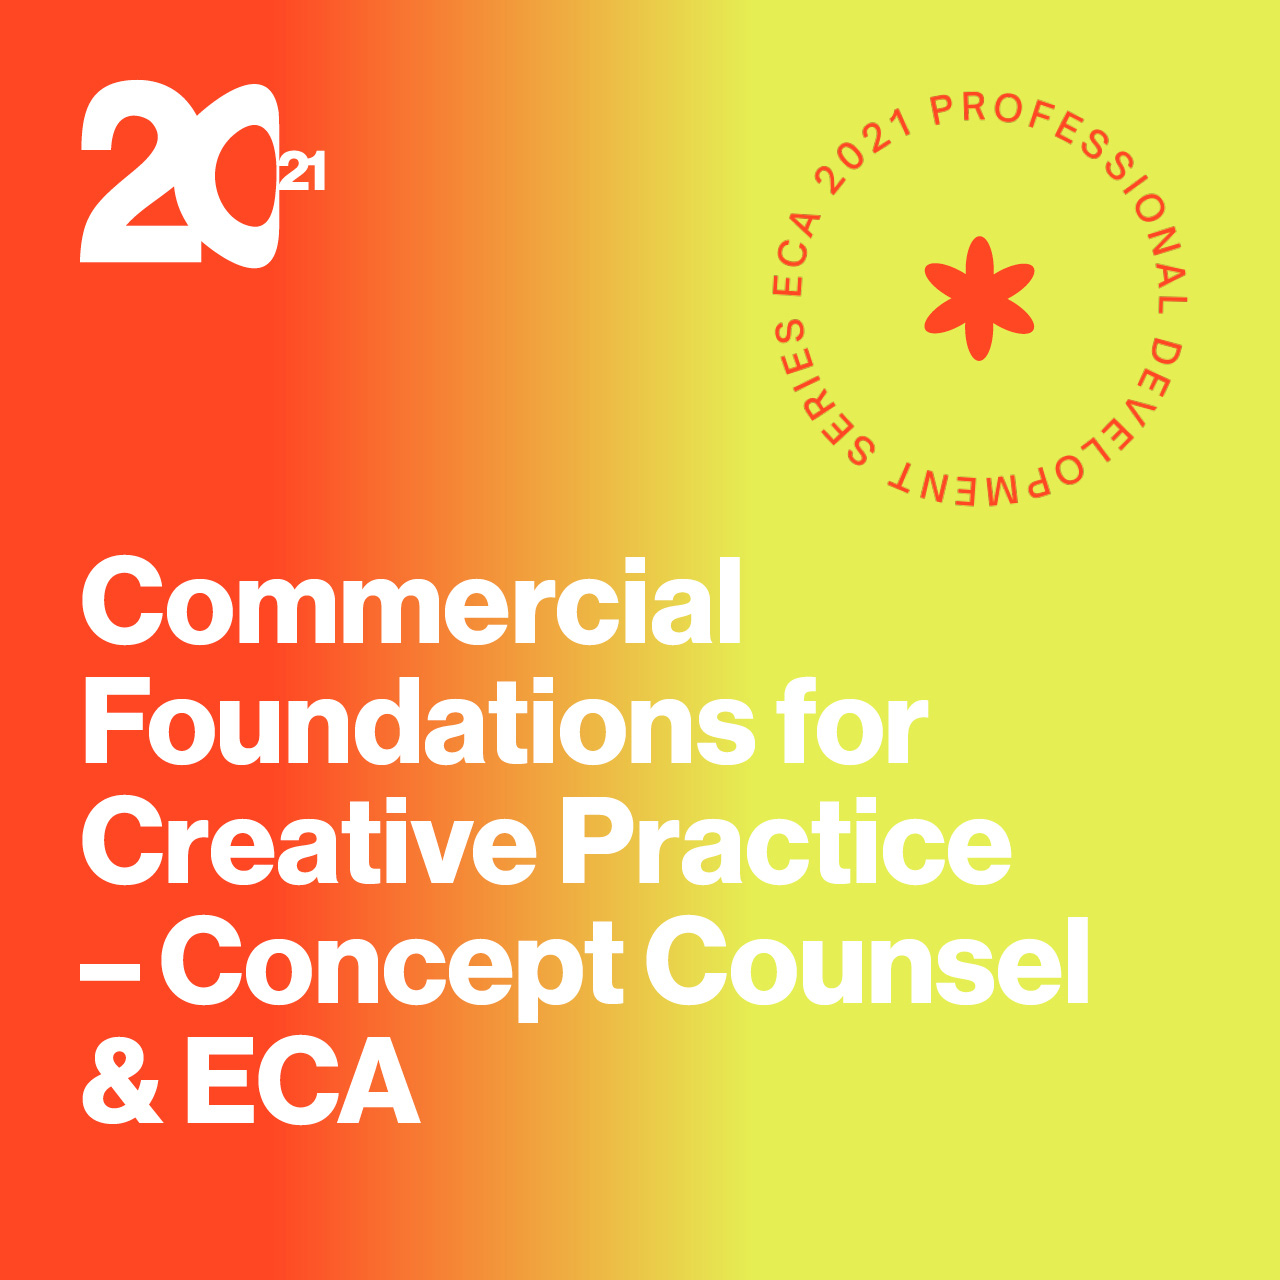 Commercial Foundations for Creative Practice - Concept Counsel & ECA